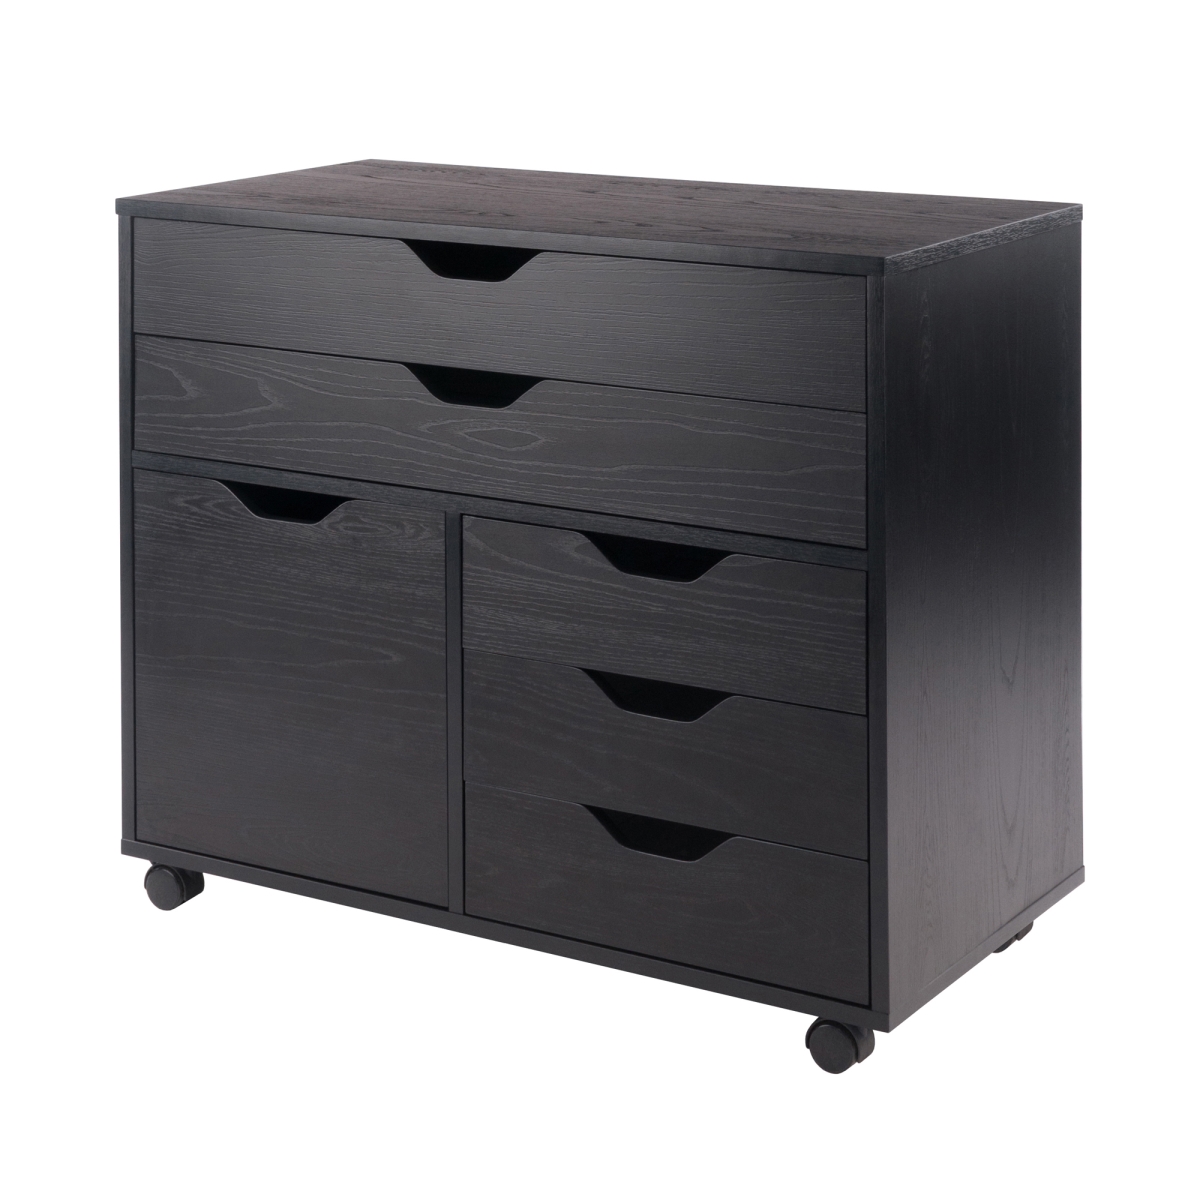 Winsome Wood 20633 26.3 x 30.7 x 15.9 in. Halifax 3 Section Mobile Storage Cabinet, Black